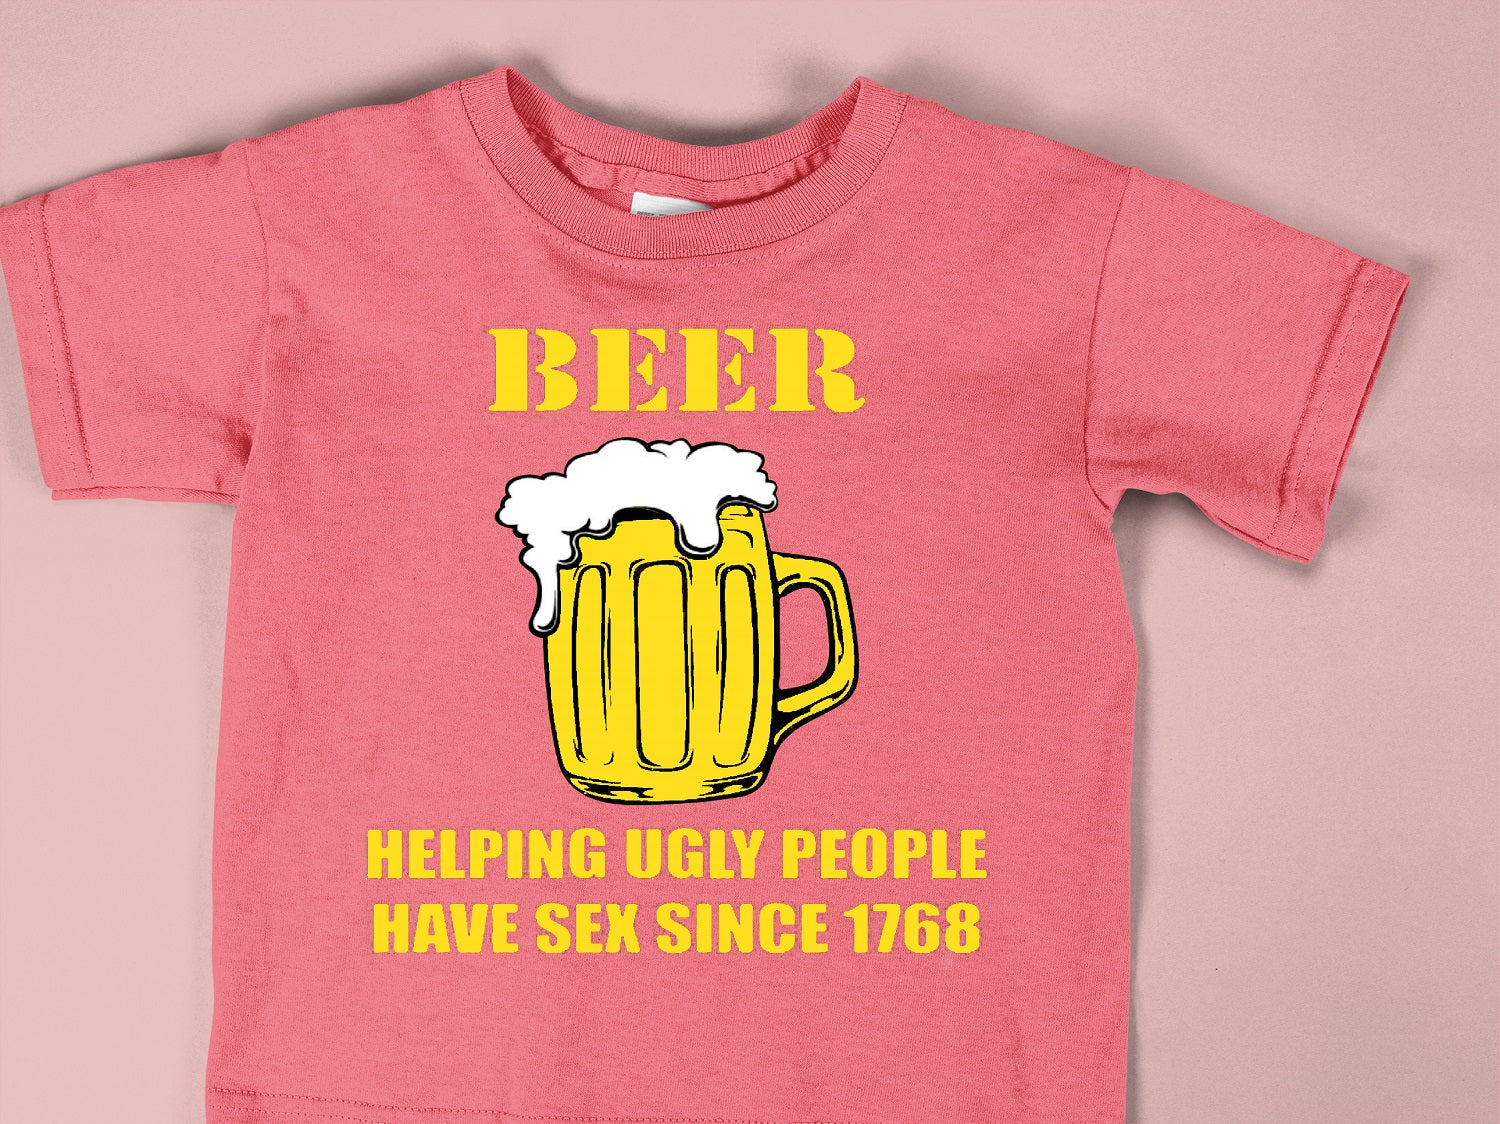 BEER Helping ugly people have sex Since 1768 - BER - 011